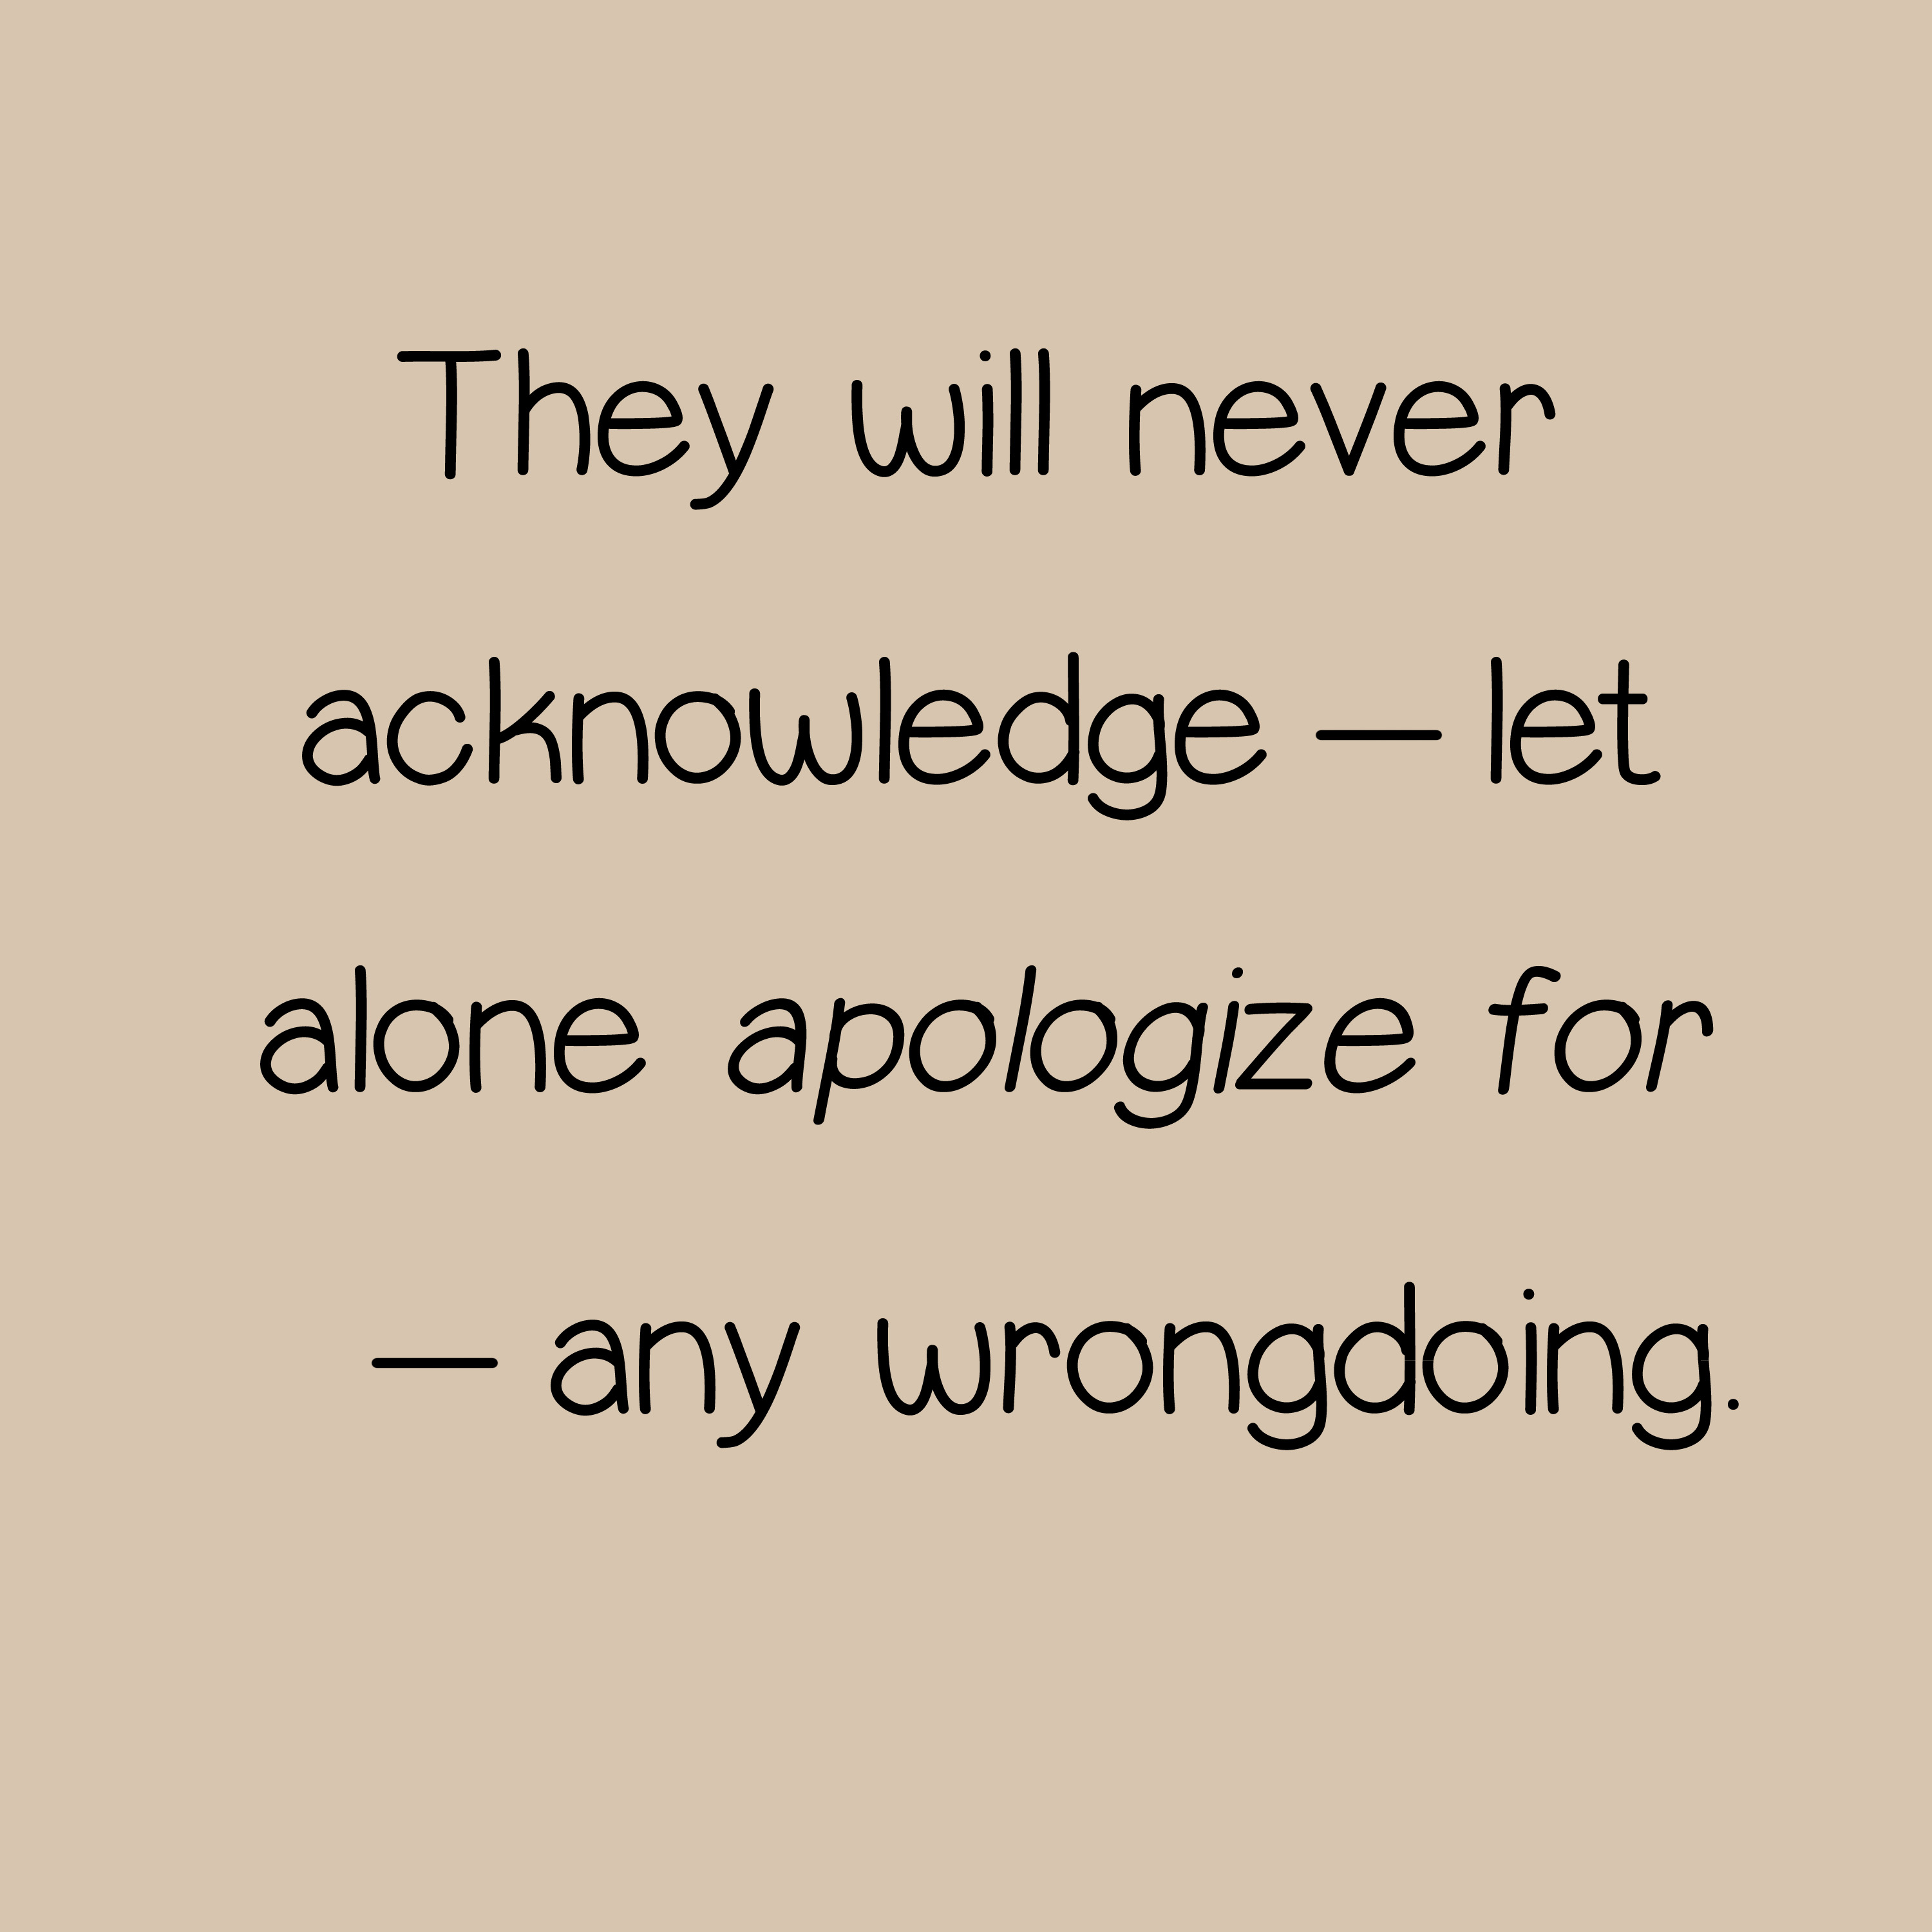 They will never apologize - let alone acknowledge - any wrong doing